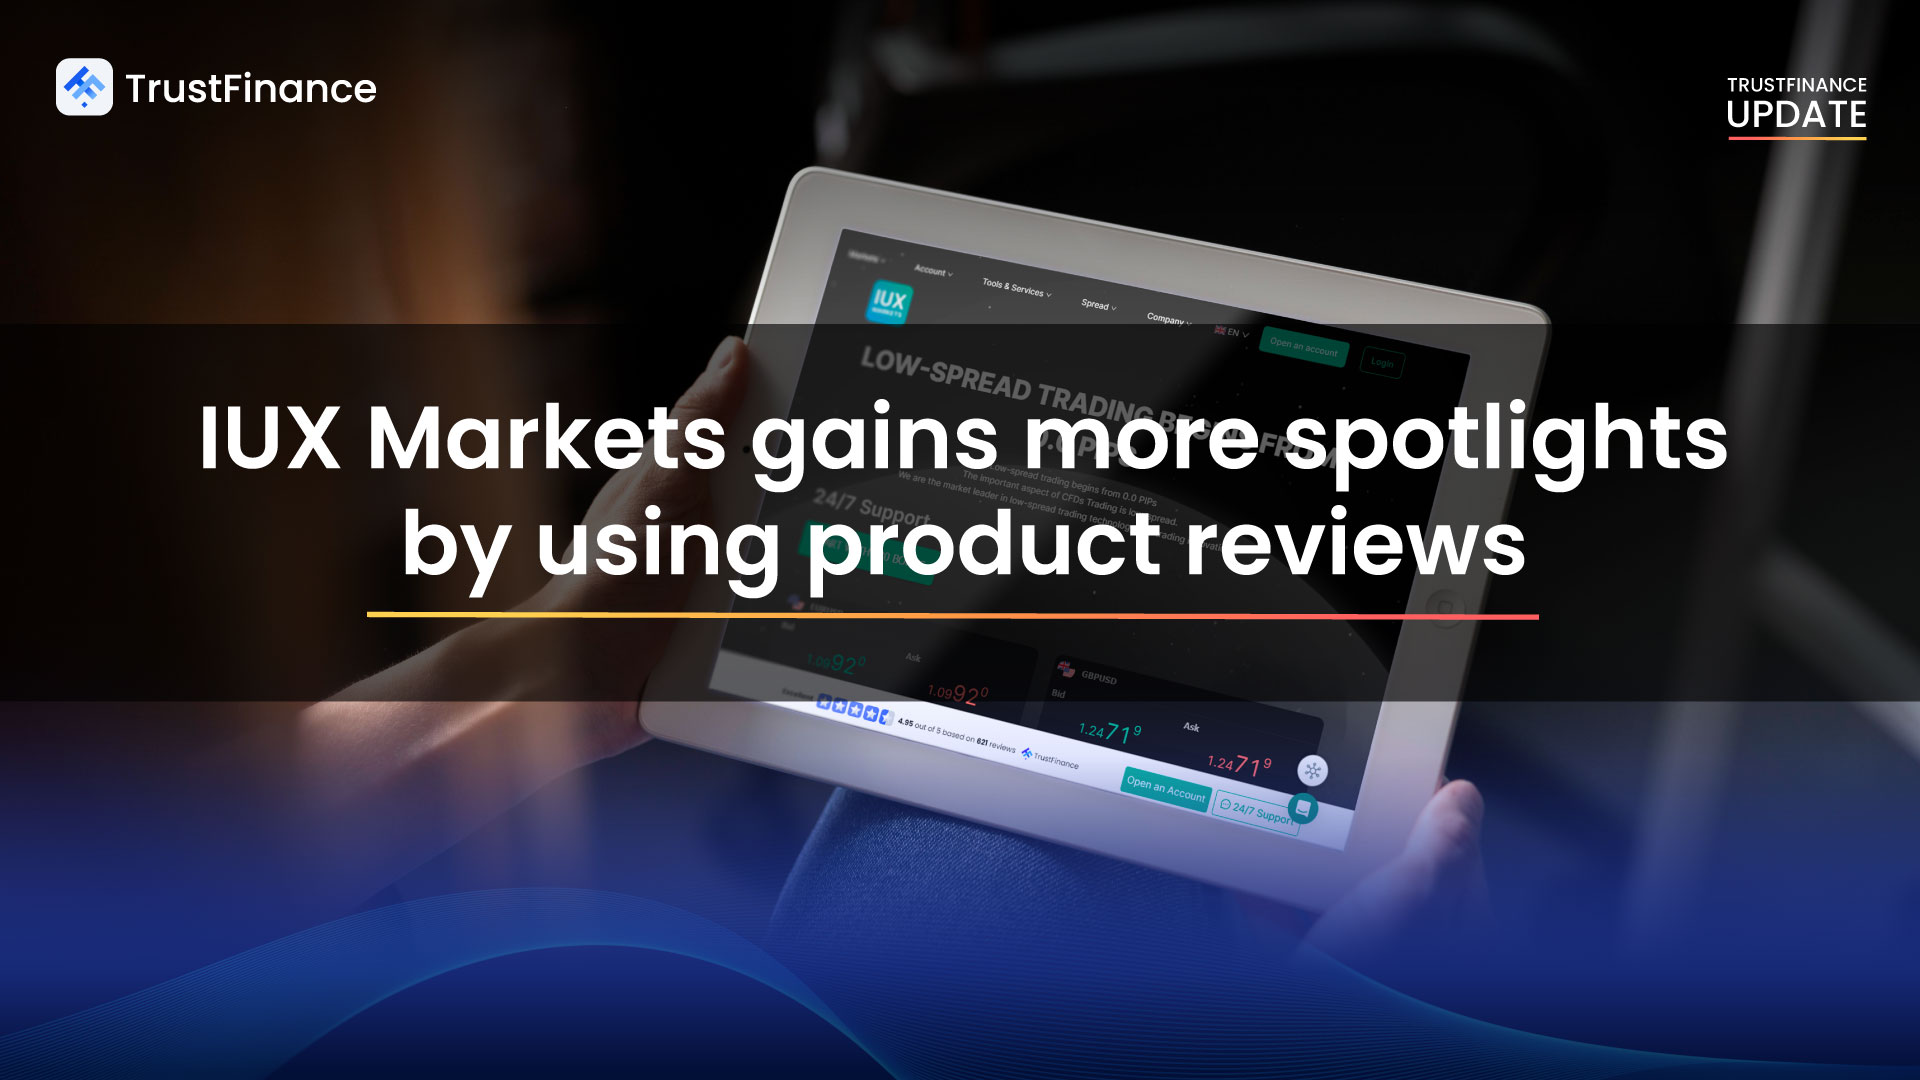 IUX Markets gains more spotlights by using product reviews